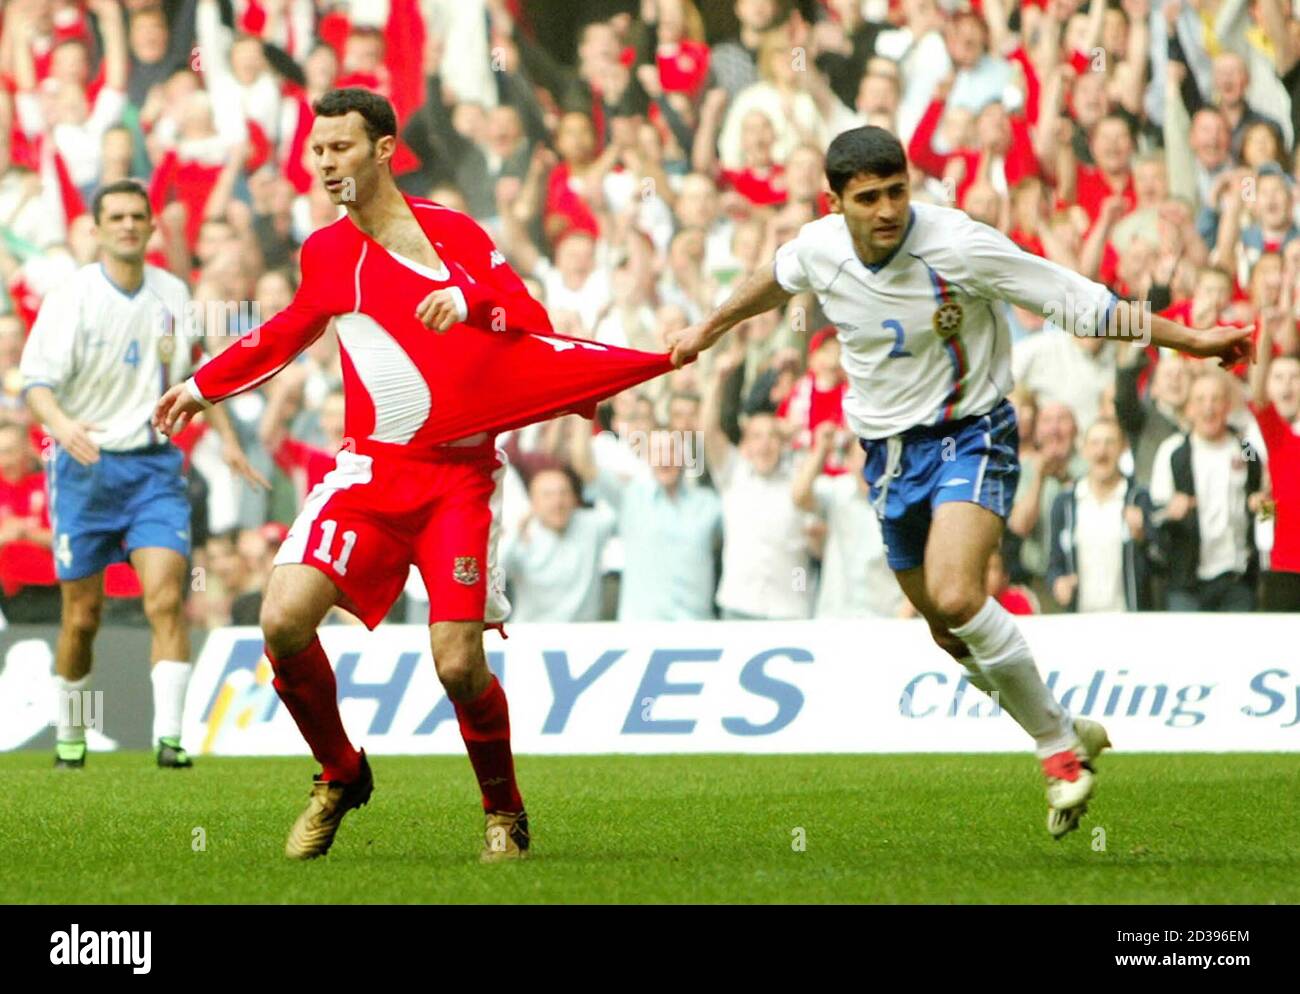 Ryan Giggs of Wales (L) has his shirt pulled by Azerbaijan's Fizuli Mahammadov (R) after scoring Wales's fourth goal in their Euro 2004 qualifying group nine match at the Millennium Stadium in Cardiff, March 29, 2003. REUTERS/Peter Macdiarmid  PKM/ASA Stock Photo